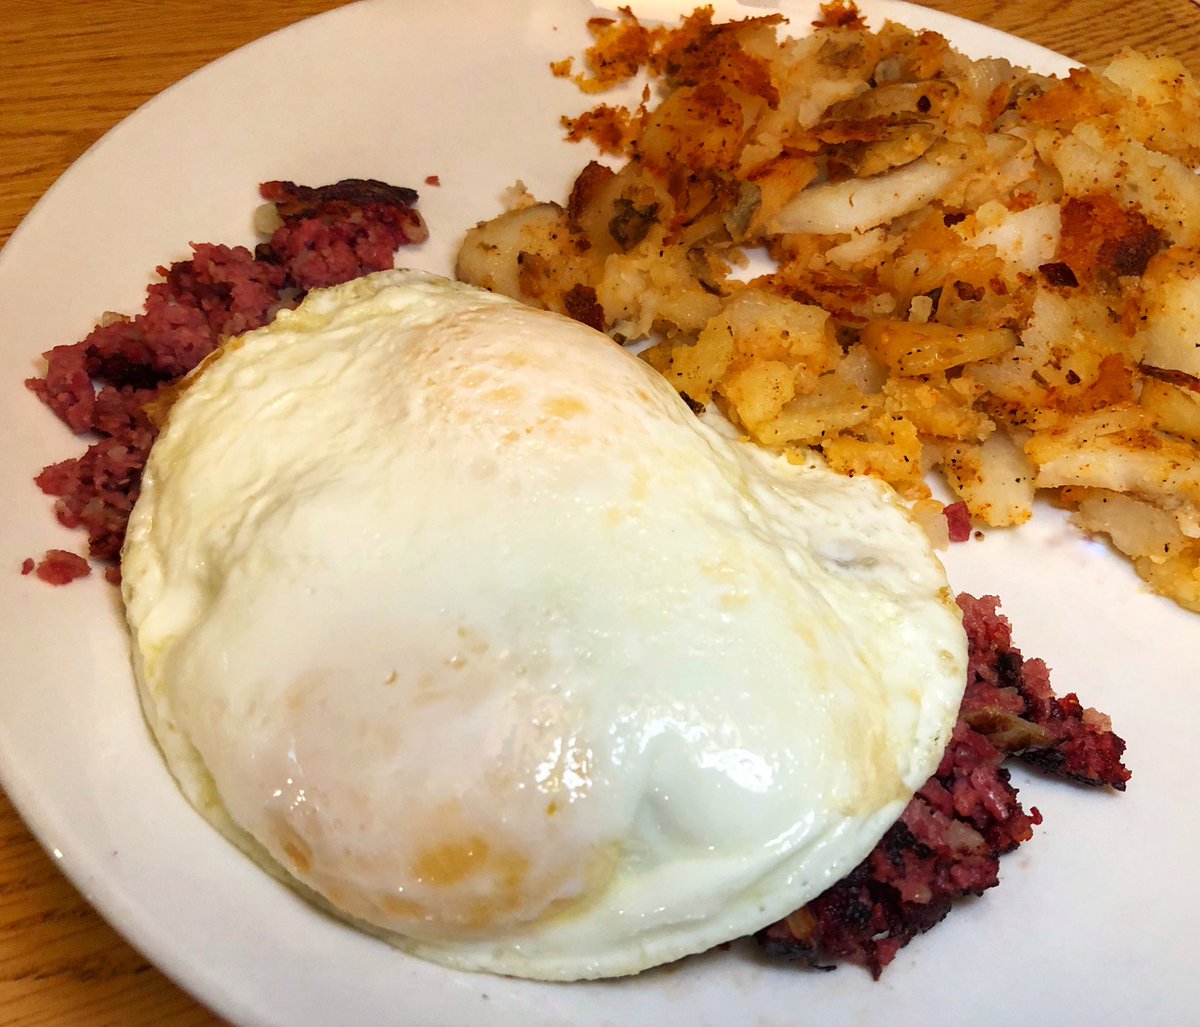 #CornedBeefHash with two eggs over easy & a side of #HomeFries at #TheOriginalPancakeHouse in #WestCaldwellNJ.
————————————————
#OriginalPancakeHouse #OriginalPancakeHouseWC #pancakes #GermanApplePancake #northjerseyeats #TonyMangia #AtTheTableWithTony #MANGIA